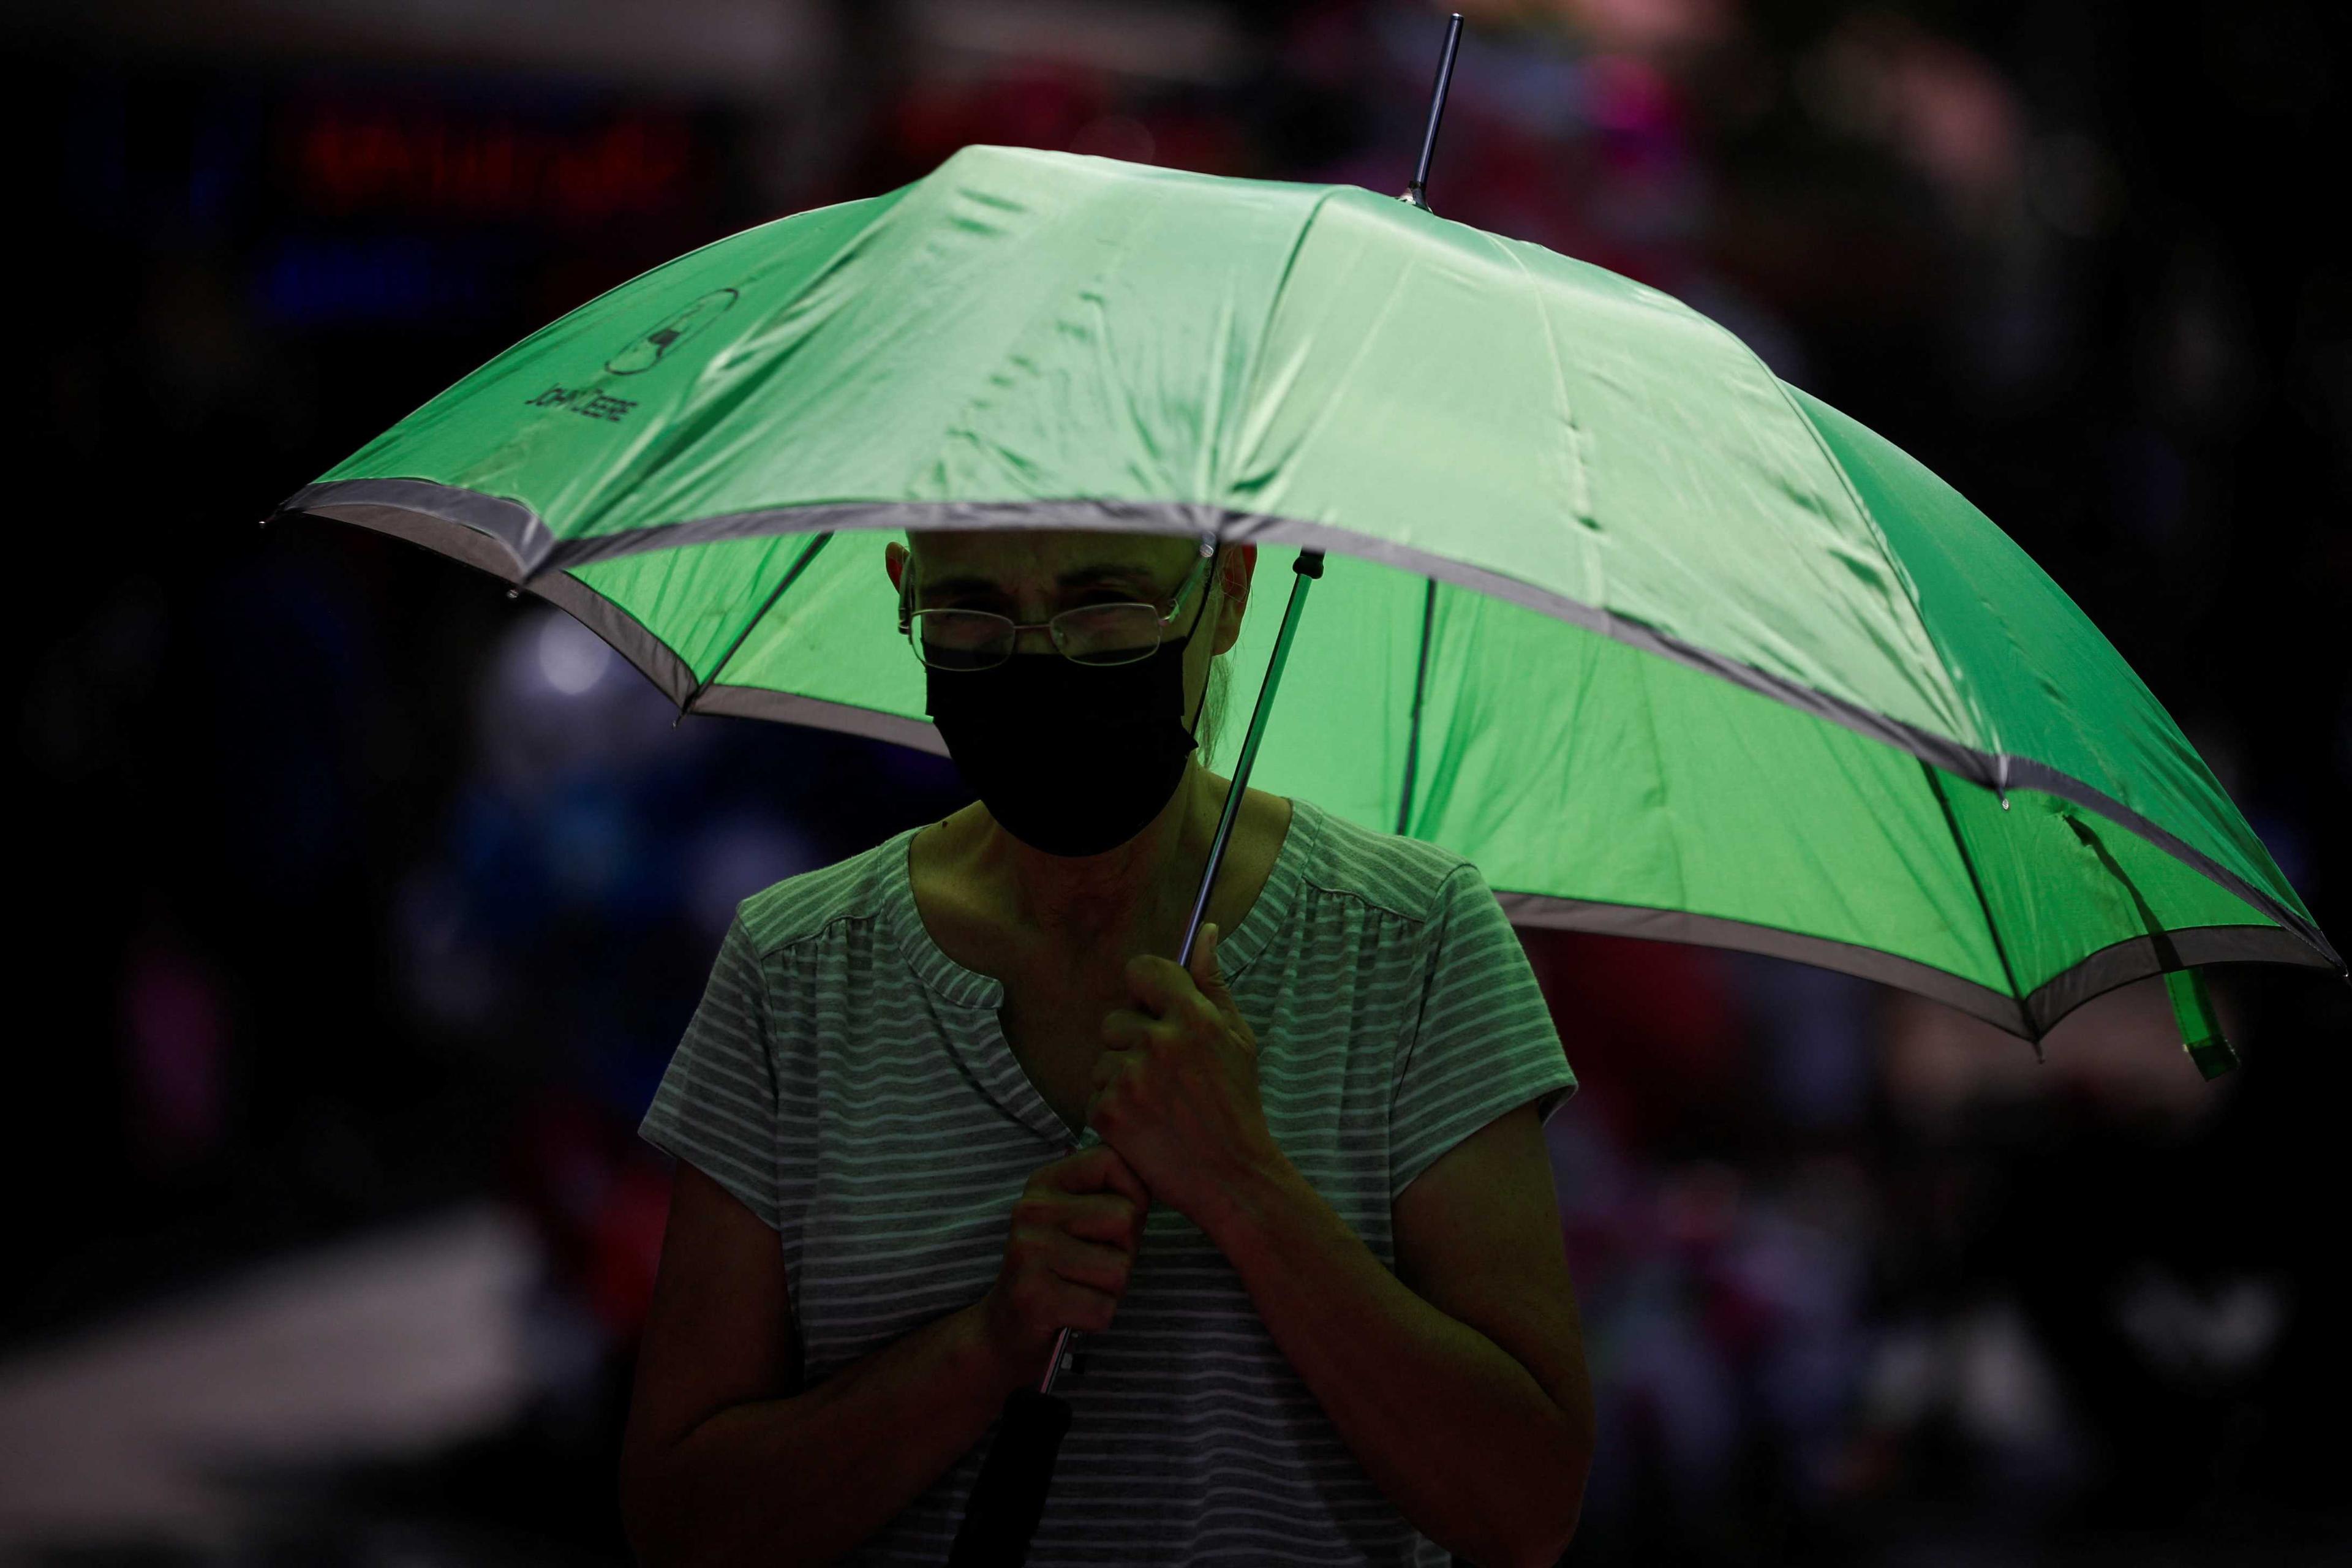 A woman takes shelter with an umbrella as she walks on a sidewalk as temperatures rise during an unusual heat wave, in Monterrey, Mexico June 14. Photo: Reuters